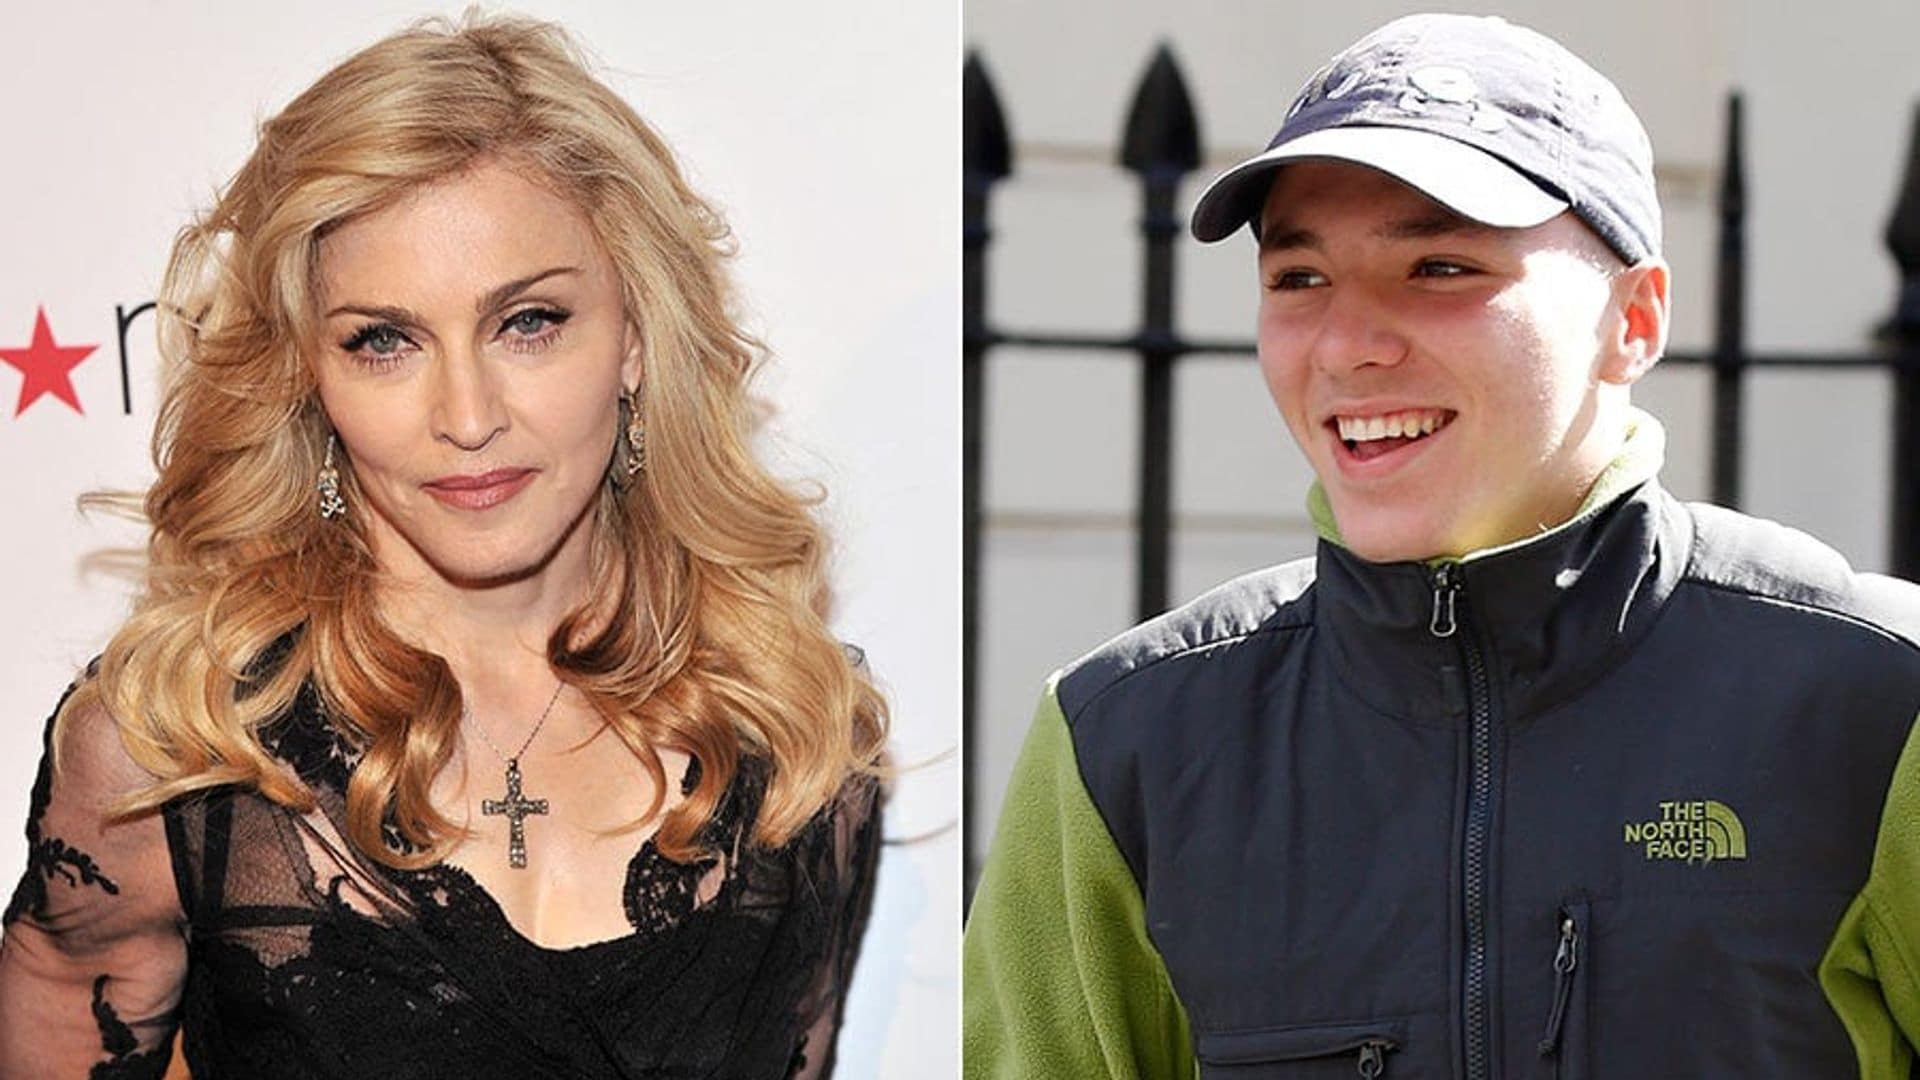 Madonna has fun outing with son Rocco Ritchie as the pair reconcile